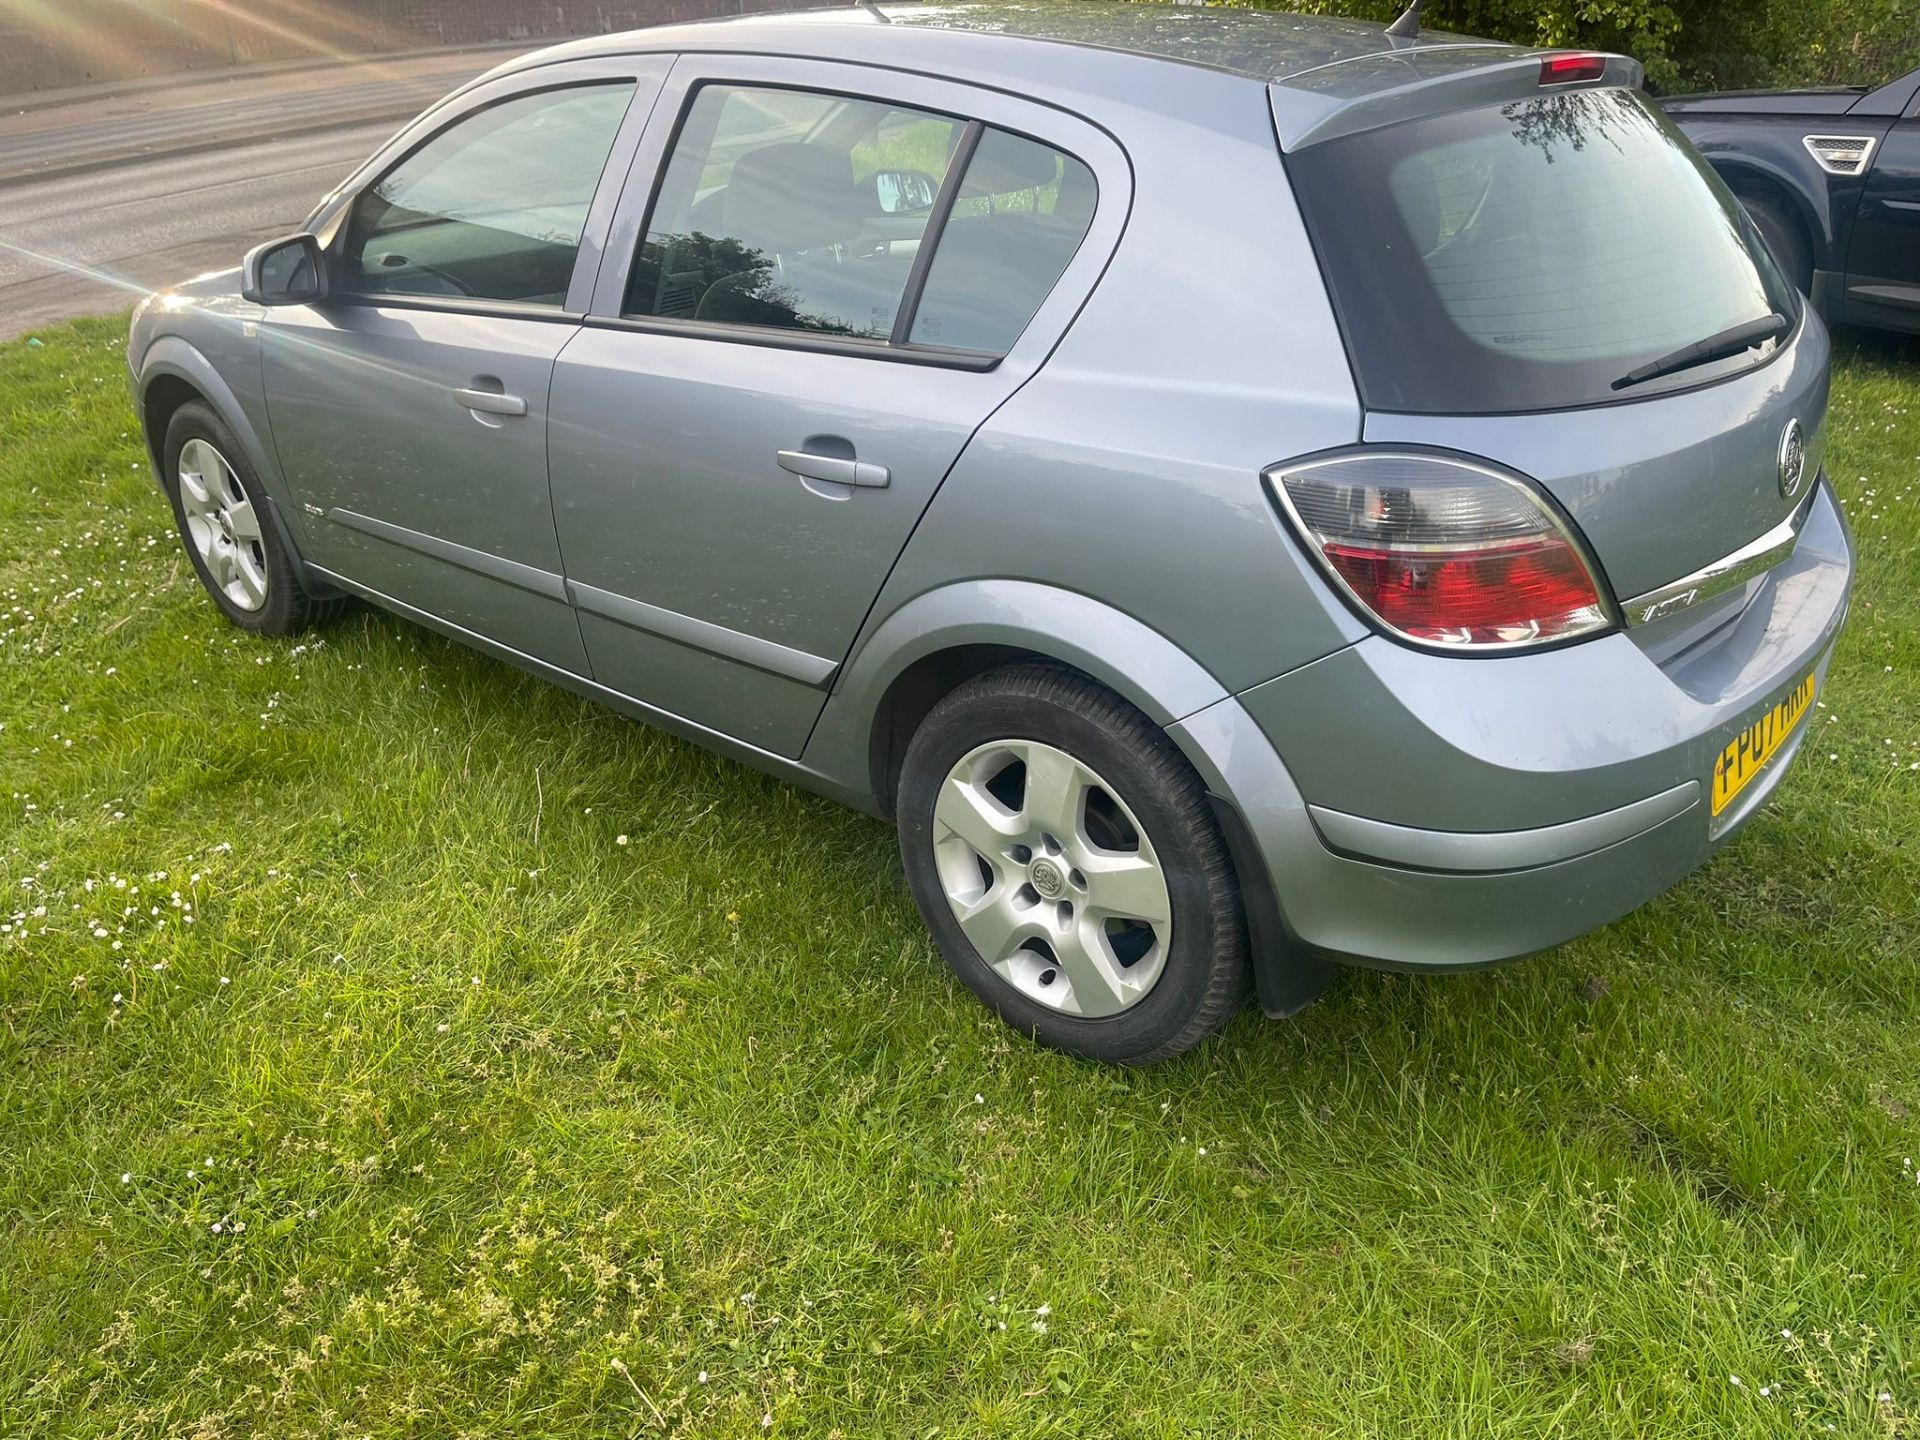 2007/07 REG VAUXHALL ASTRA CLUB TWINPORT 1.4 PETROL MANUAL HATCHBACK, SHOWING 2 FORMER KEEPERS - Image 4 of 7